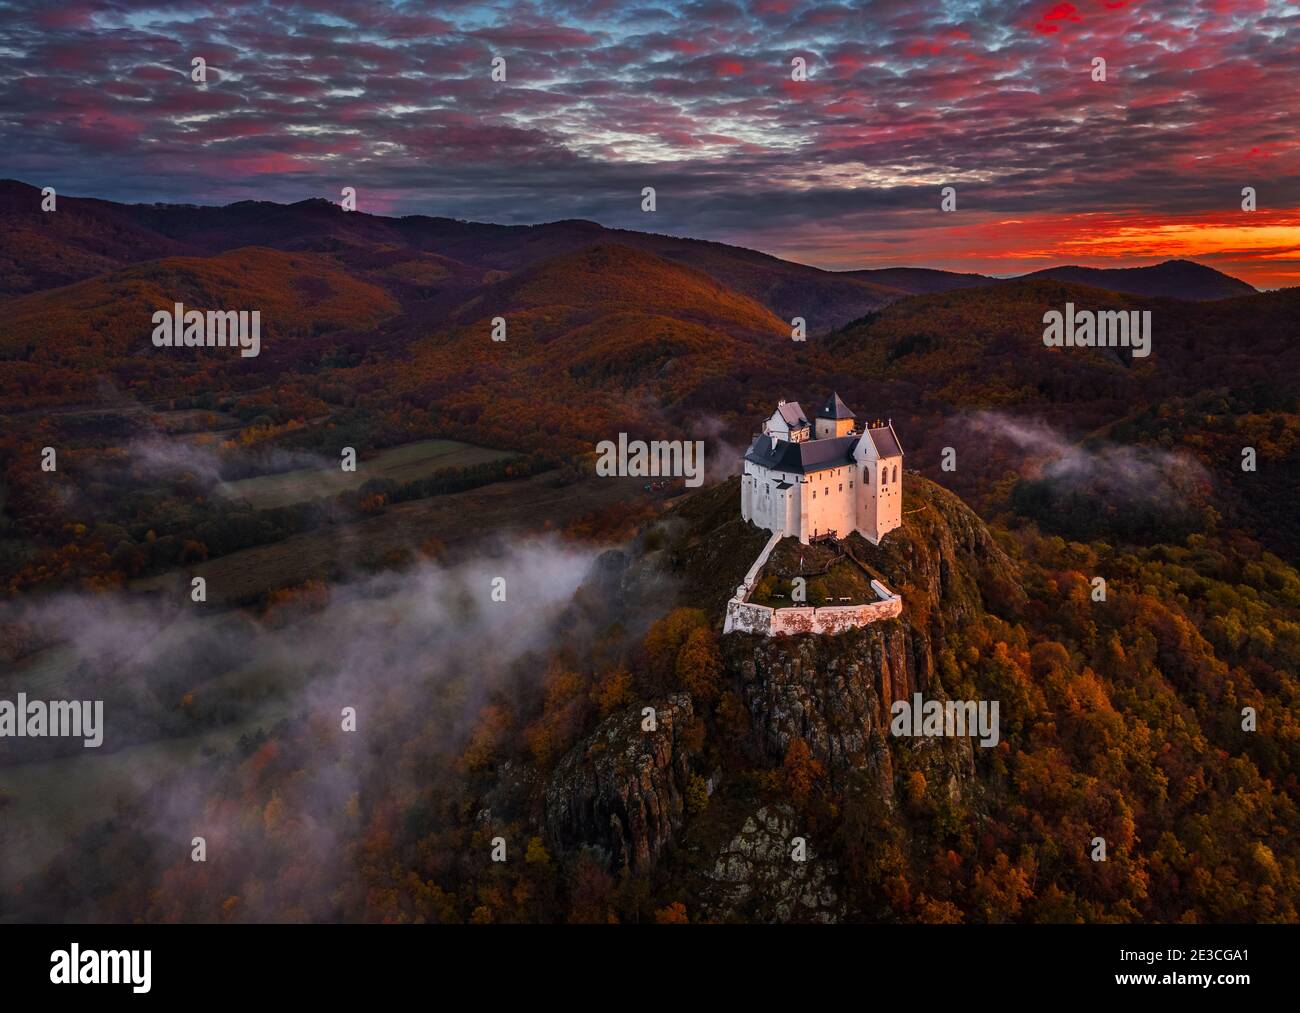 Fuzer, Hungary - Aerial view of the beautiful Castle of Fuzer with amazing colorful sunrise sky and clouds on an autumn morning. The castle has been l Stock Photo